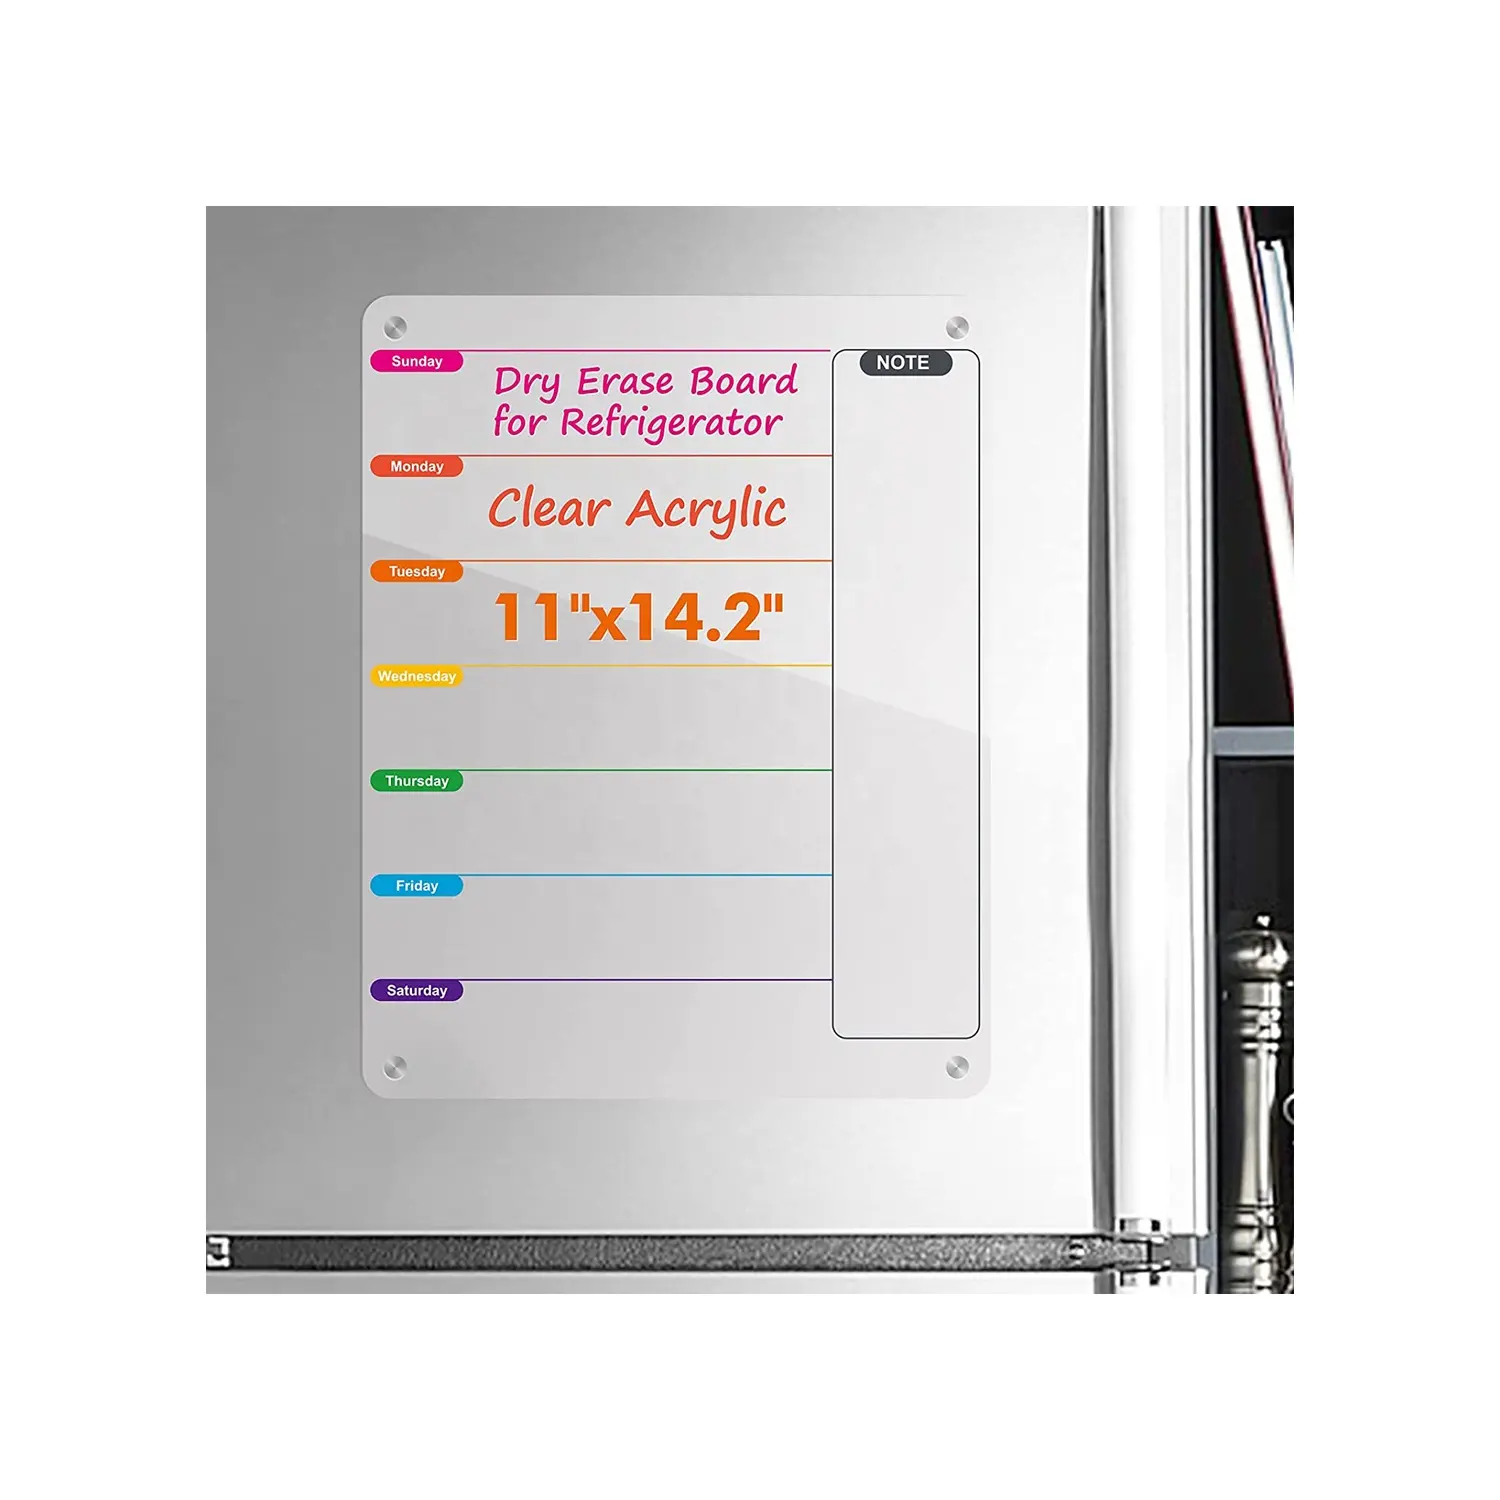 Weekly Dry Erase Board for Refrigerator Magnetic Weekly Calendar for Fridge Clear Acrylic Note Board Planner Schedule Board